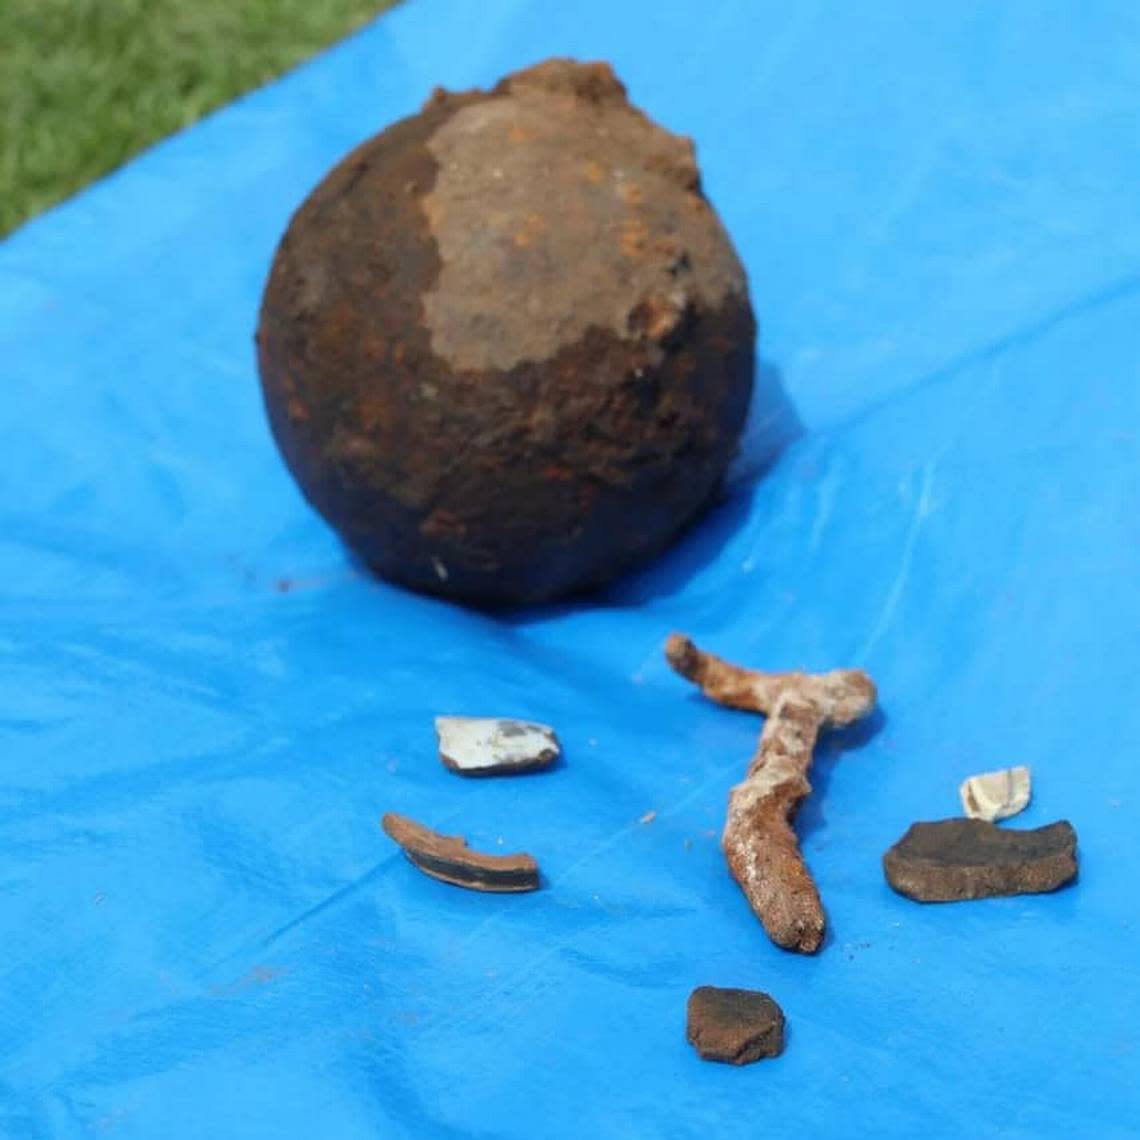 Some of the artifacts found at the castle site.